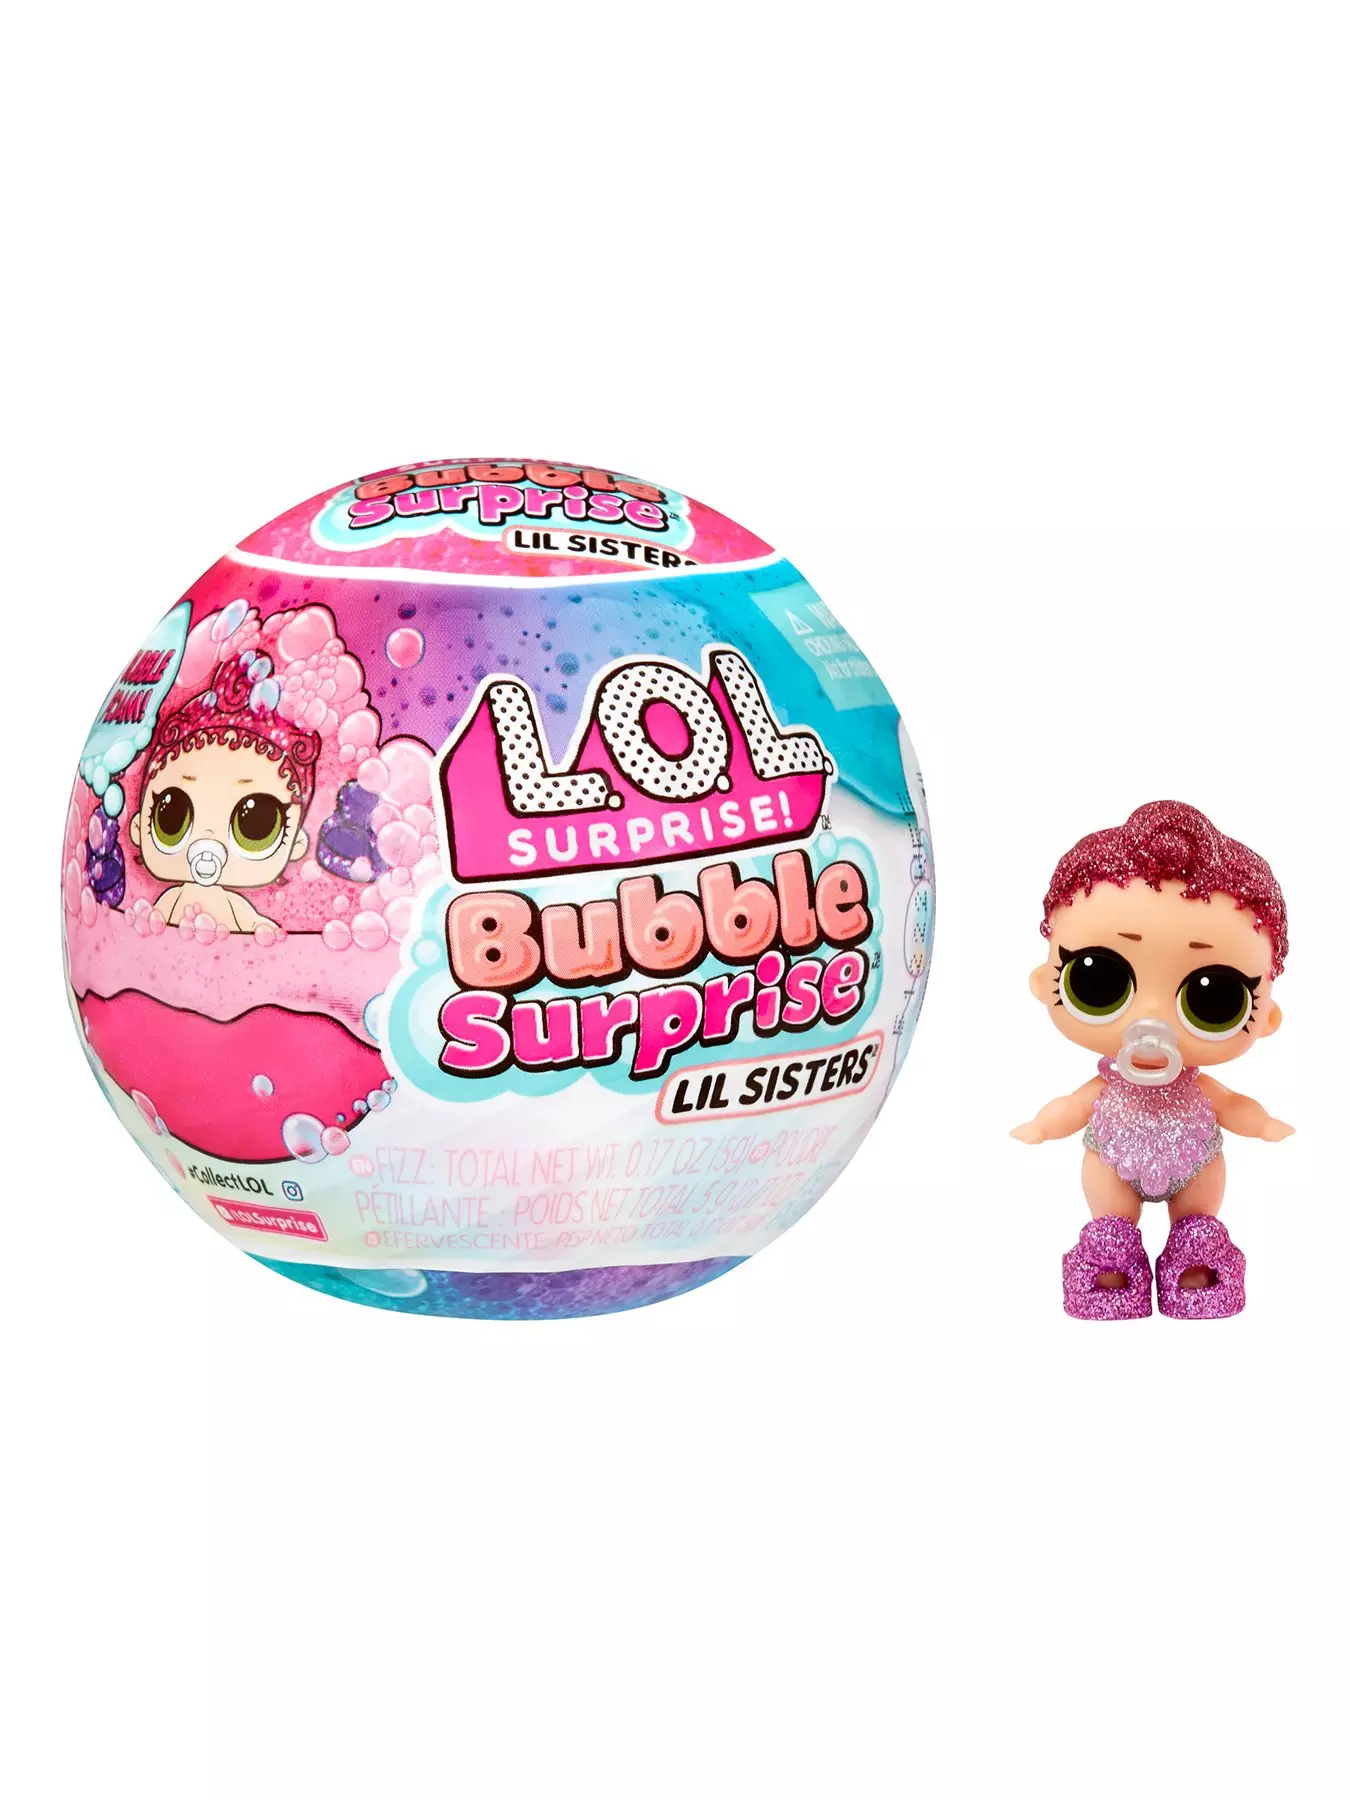  L.O.L. Surprise! Glitter Color Change Pearl (Purple) with 6  Surprises- Exclusive Collectible Doll & Lil Sister in Interactive Playset,  Holiday Toy, Great Gift for Kids Ages 4 5 6+ Years Old 